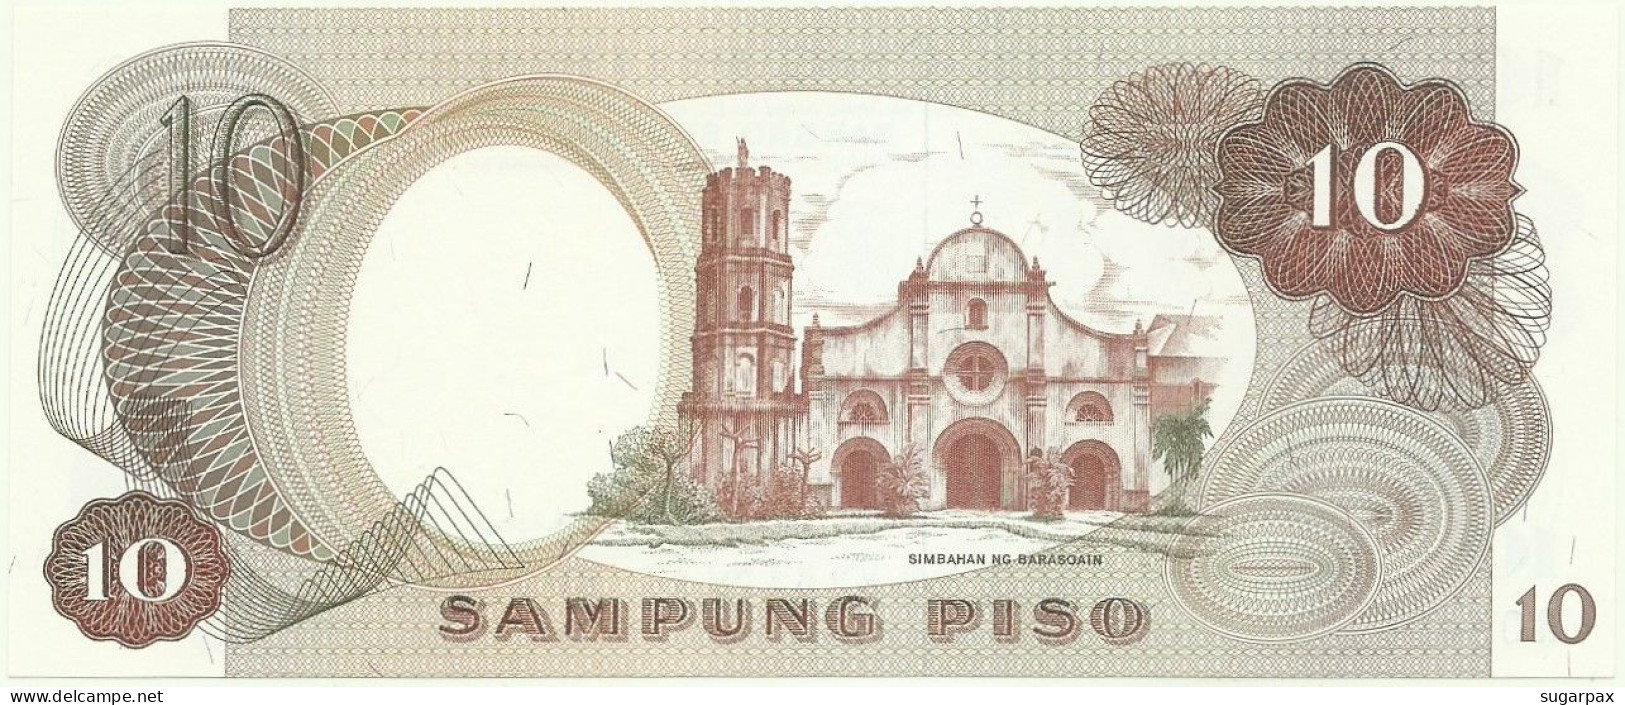 Philippines - 10 Piso - ND ( 1970s ) - Pick 144.b - Unc. - Sign. 8 - Serie R - Philippinen